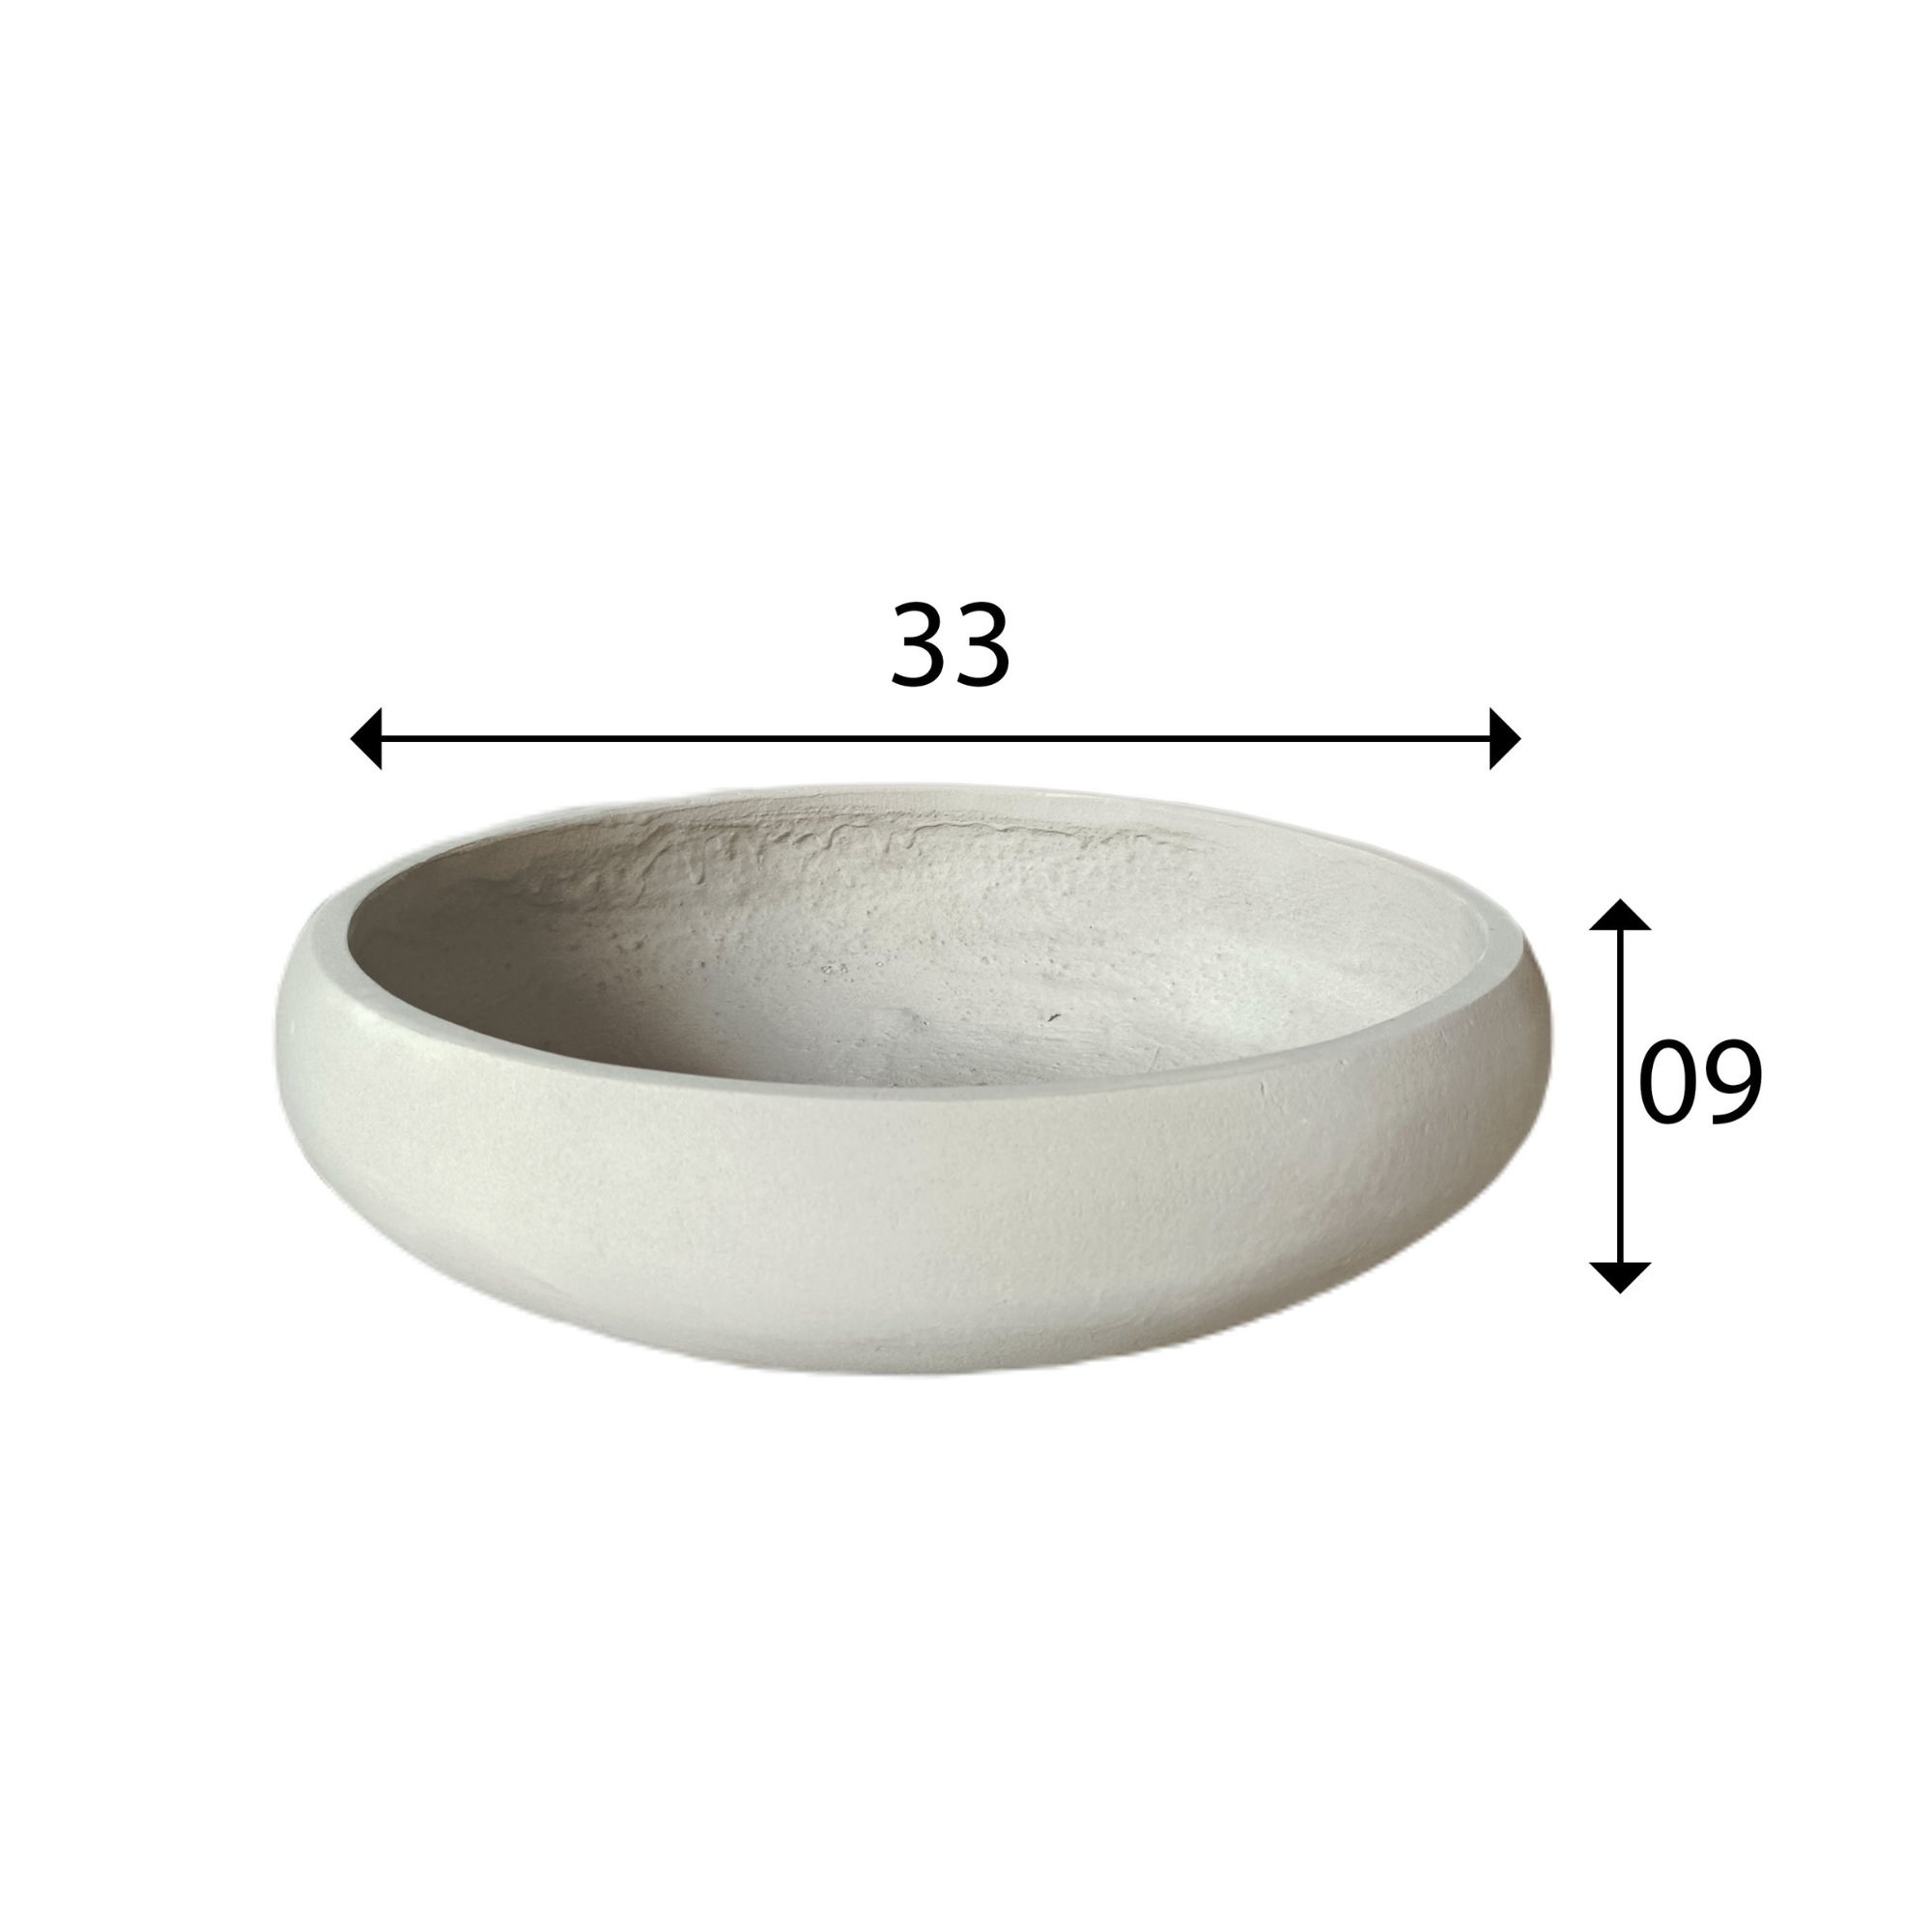 Sand Cement Terrazzo Indoor/Outdoor Plant Pot By Roots33W*33D*9H. (8785197236545)